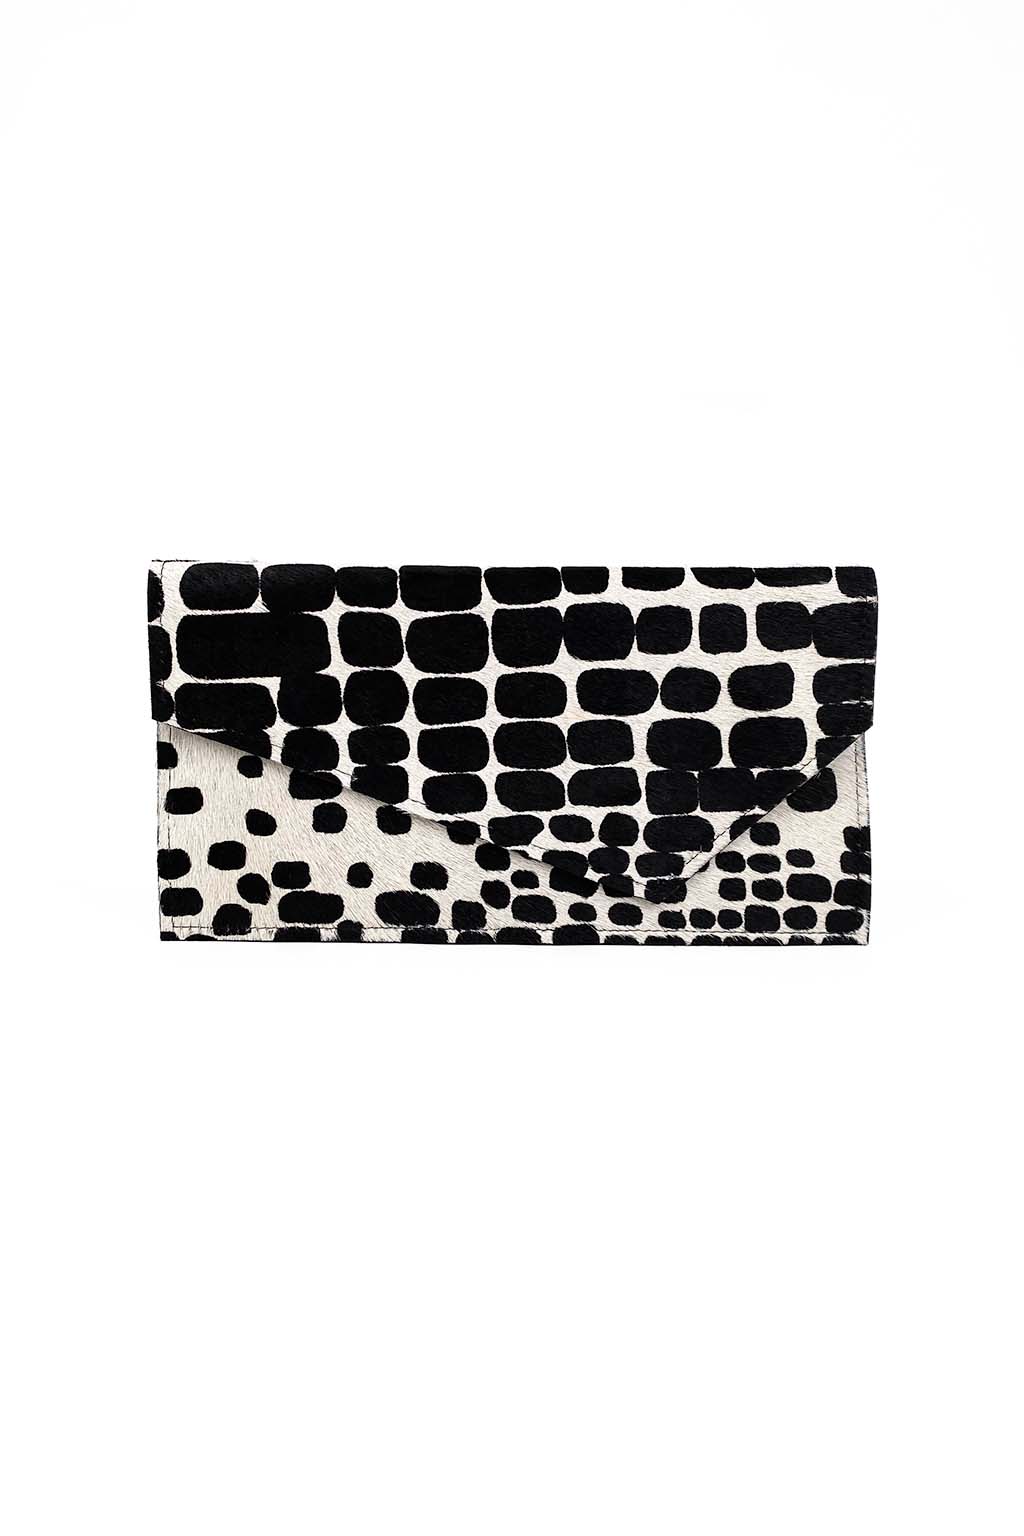 Women’s Black / White Keeffe Clutch One Size Sister Epic